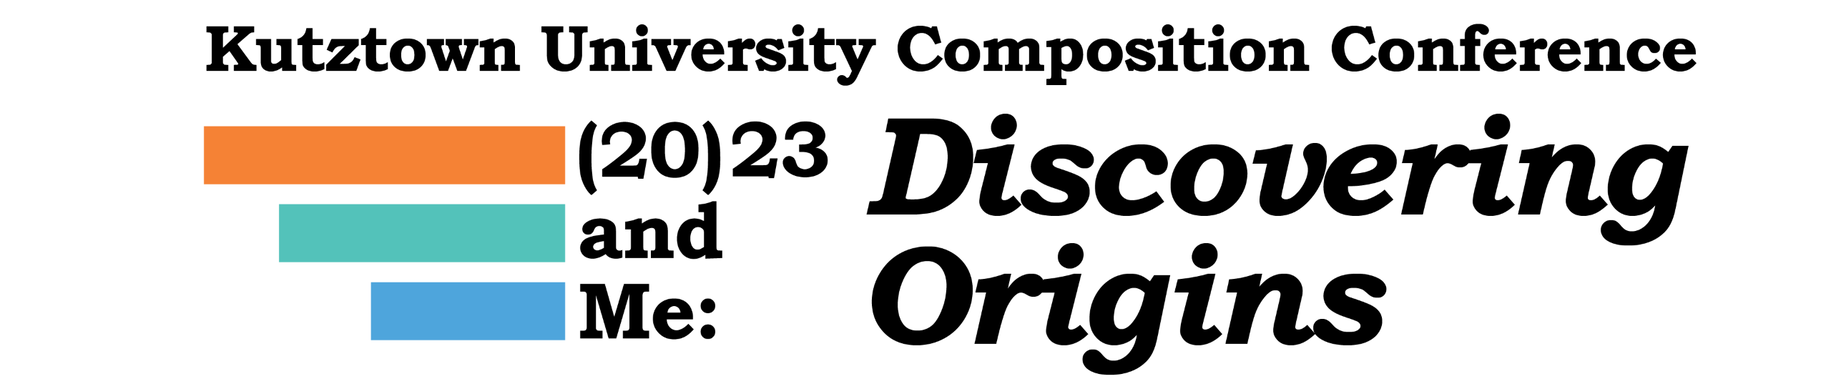 KUCC 2023 logo:"Kutztown University Composition Conference wording above three color bars (orange, green, blue) and additional wording (20)23 and Me: Discovering Origins